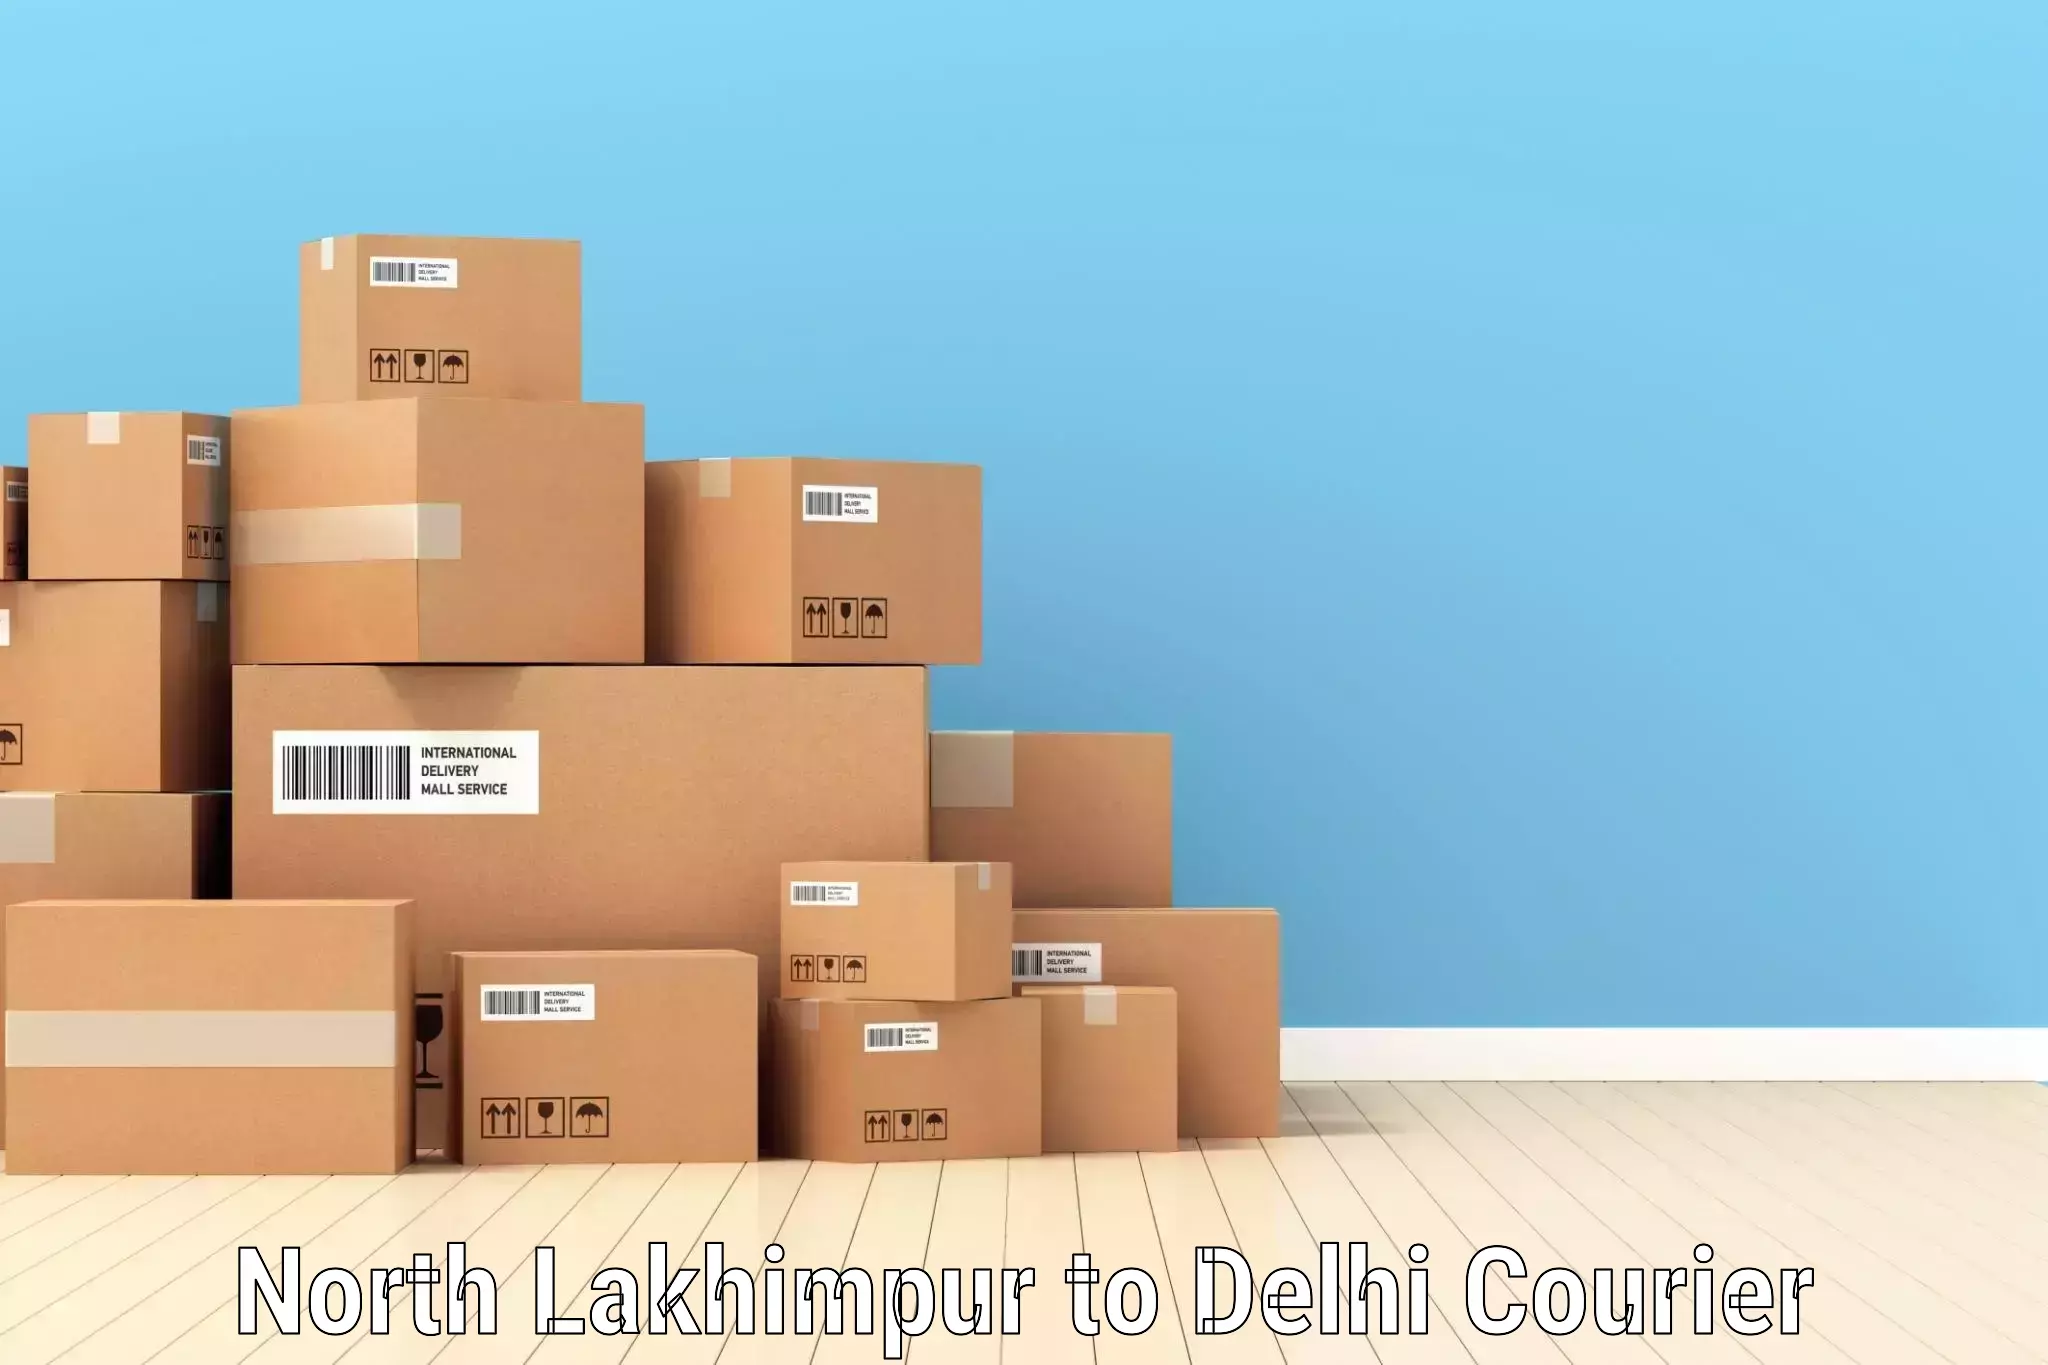 Multi-city courier North Lakhimpur to NCR